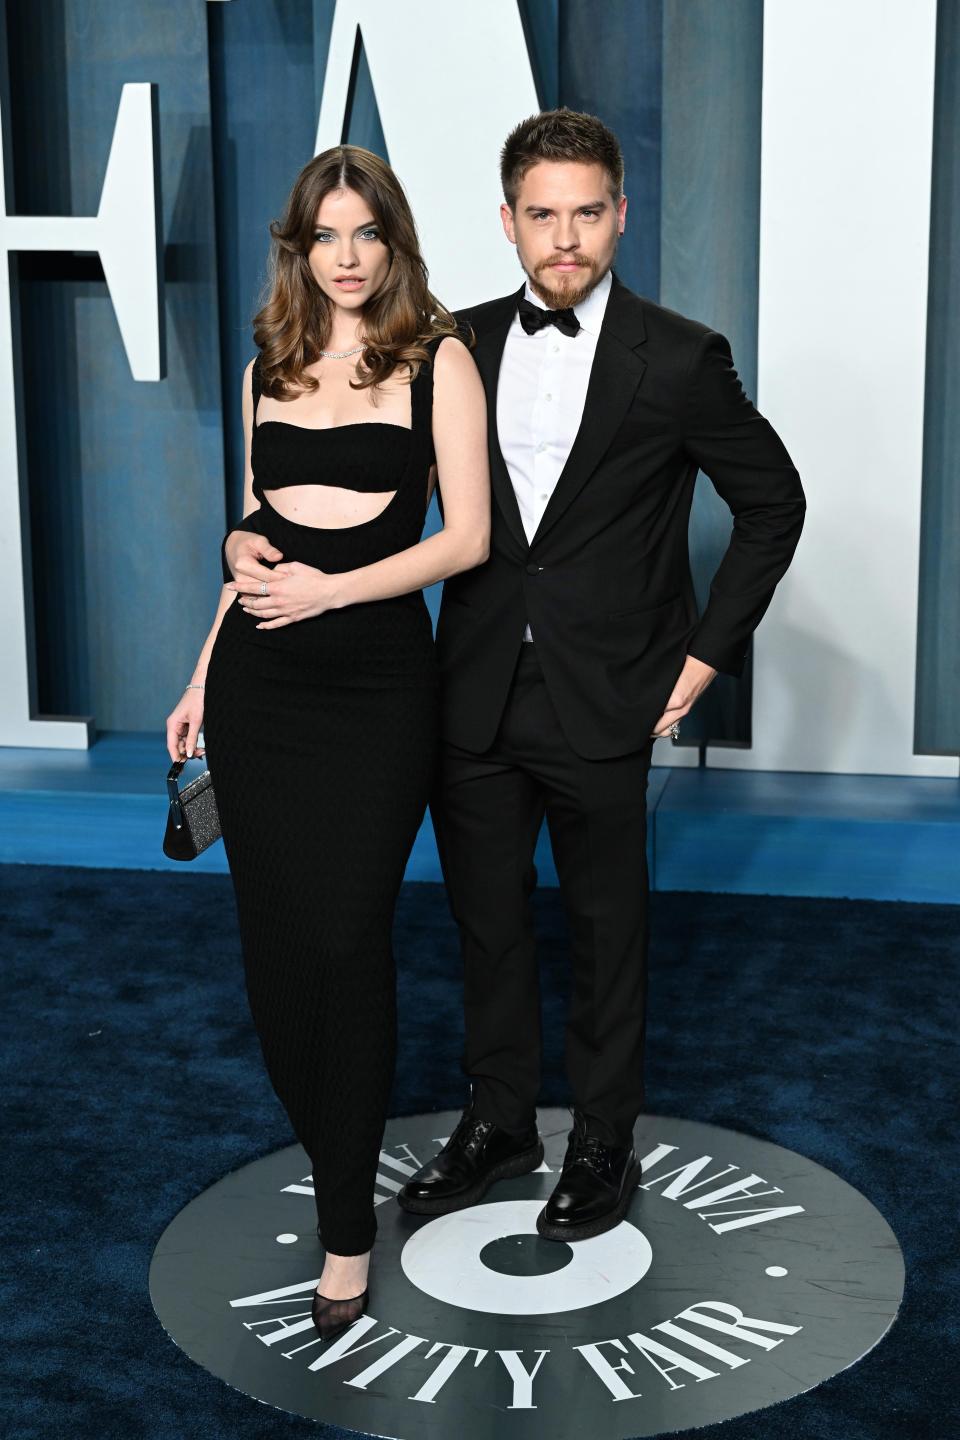 Barbara in a bandeau style dress with shoulder straps and a cut out under her chest. She's wearing a black mini purse and pointed sheer black heels. Dylan is wearing a black tuxedo, bowtie, and chunky shoes.